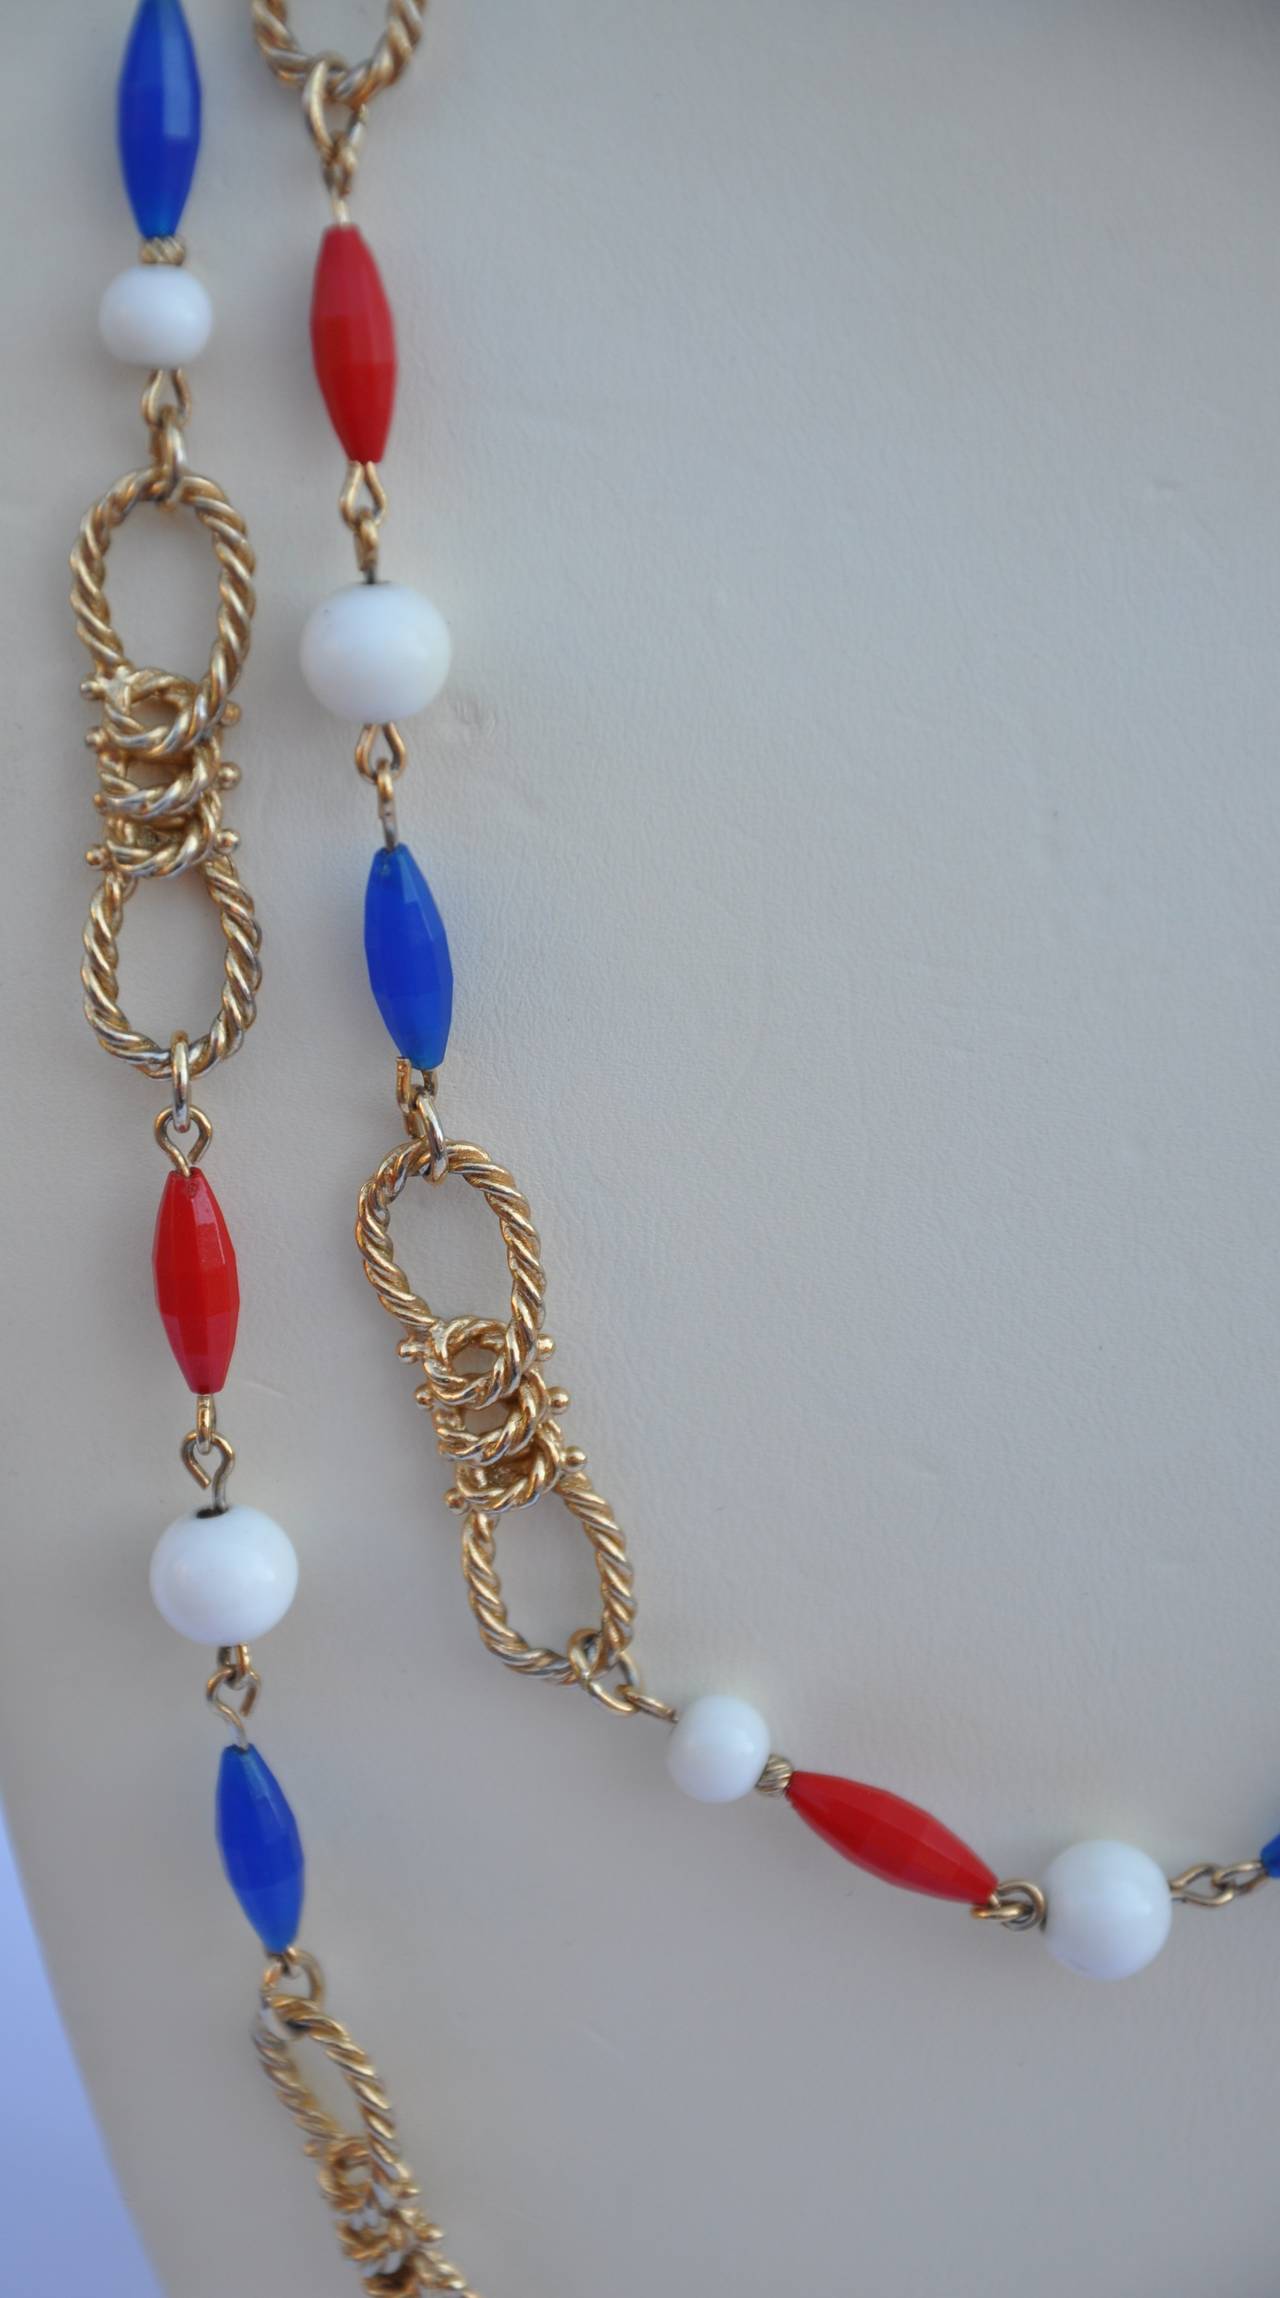 Trifari wonderful gilded gold vermeil hardware is paired with multi-colors of red, white and blue beads. The necklace measures 46" in total length. Necklace is signed.